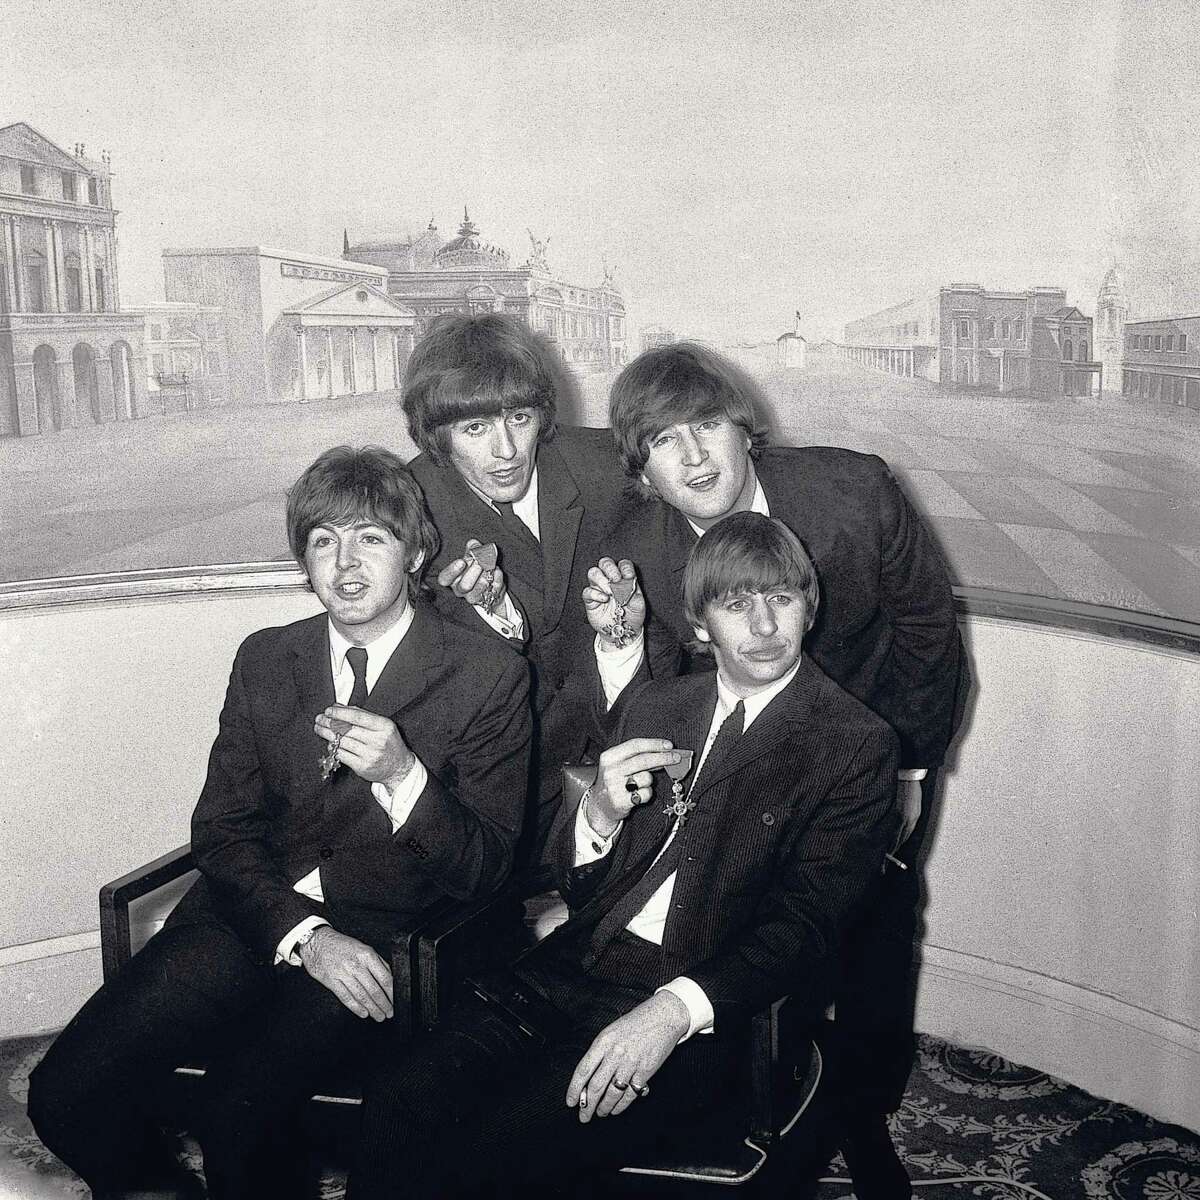 LONDON - OCTOBER 26: (Clockwise) English singer, songwriter and guitarist George Harrison (1943-2001), English singer, songwriter and guitarist John Lennon (1940-1980), English singer, songwriter and drummer Ringo Starr and English singer, songwriter and bassist Paul McCartney of the Beatles display their MBE medals at Buckingham Palace on October 26, 1965, in London, United Kingdom. (Photo by Jeff Hochberg/Getty Images)